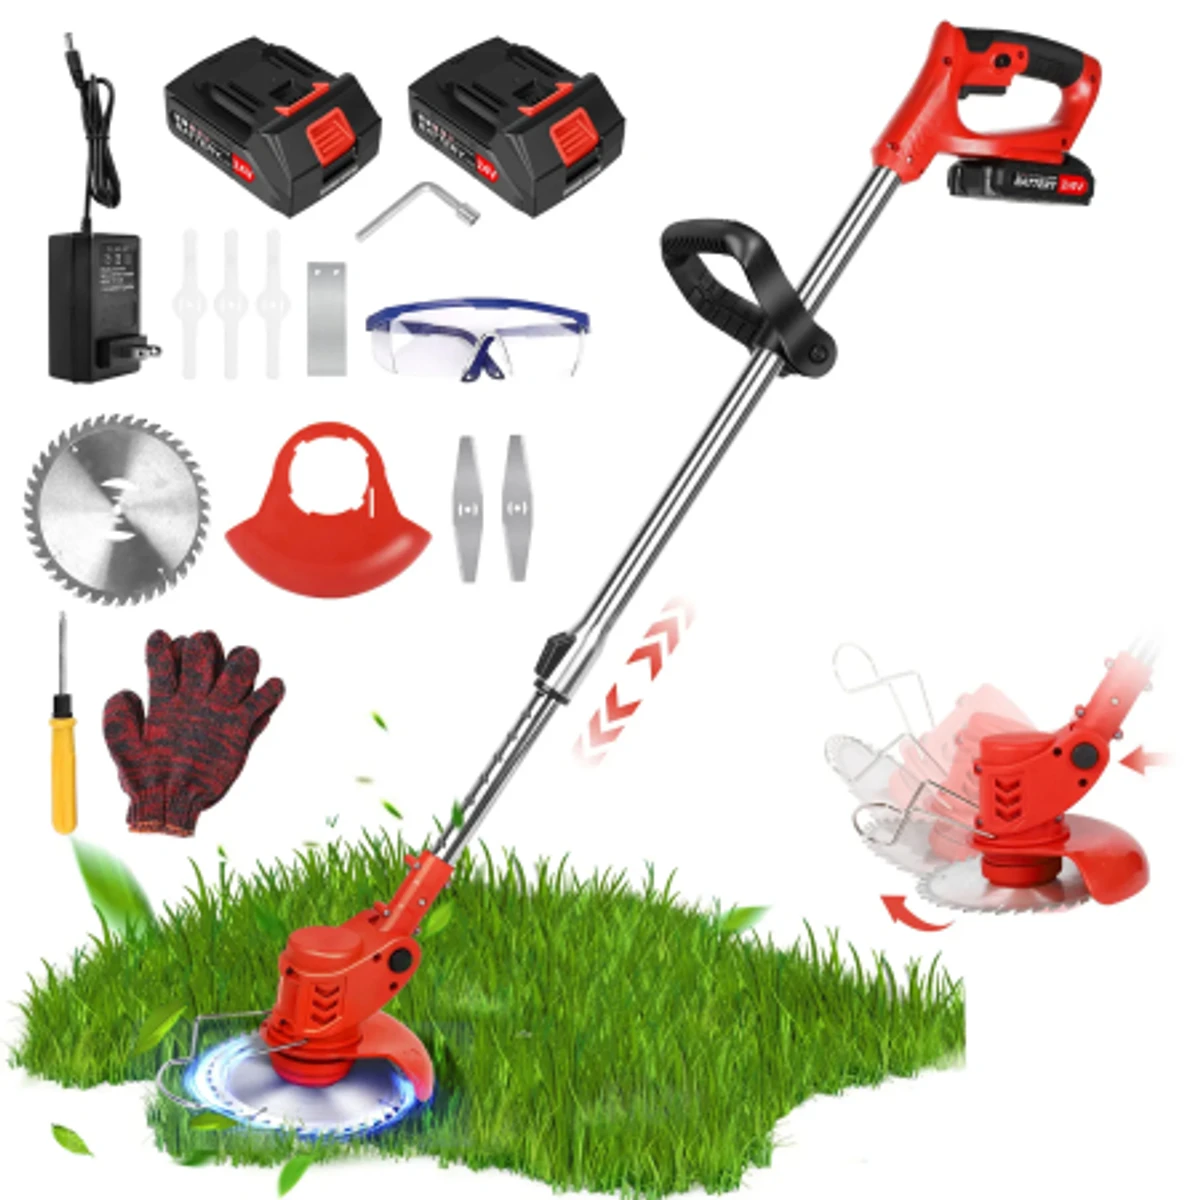 24V Cordless Grass String Trimmer 21000RPM Electric Lawn Mower Weed Adjustable Foldable Cutter Garden with 2 Battery